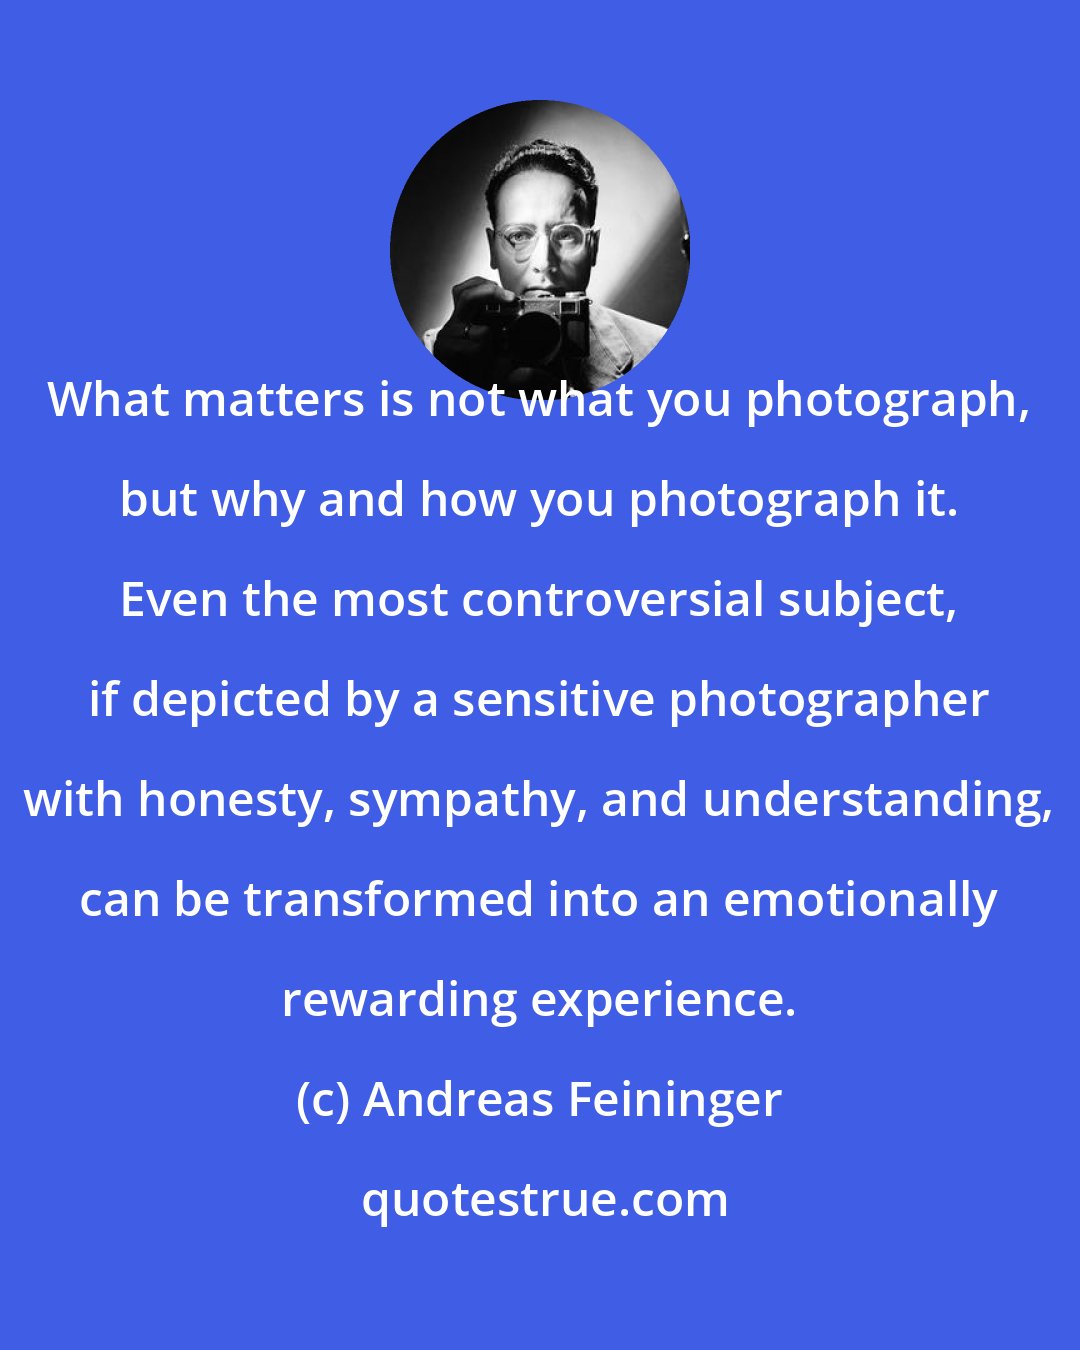 Andreas Feininger: What matters is not what you photograph, but why and how you photograph it. Even the most controversial subject, if depicted by a sensitive photographer with honesty, sympathy, and understanding, can be transformed into an emotionally rewarding experience.